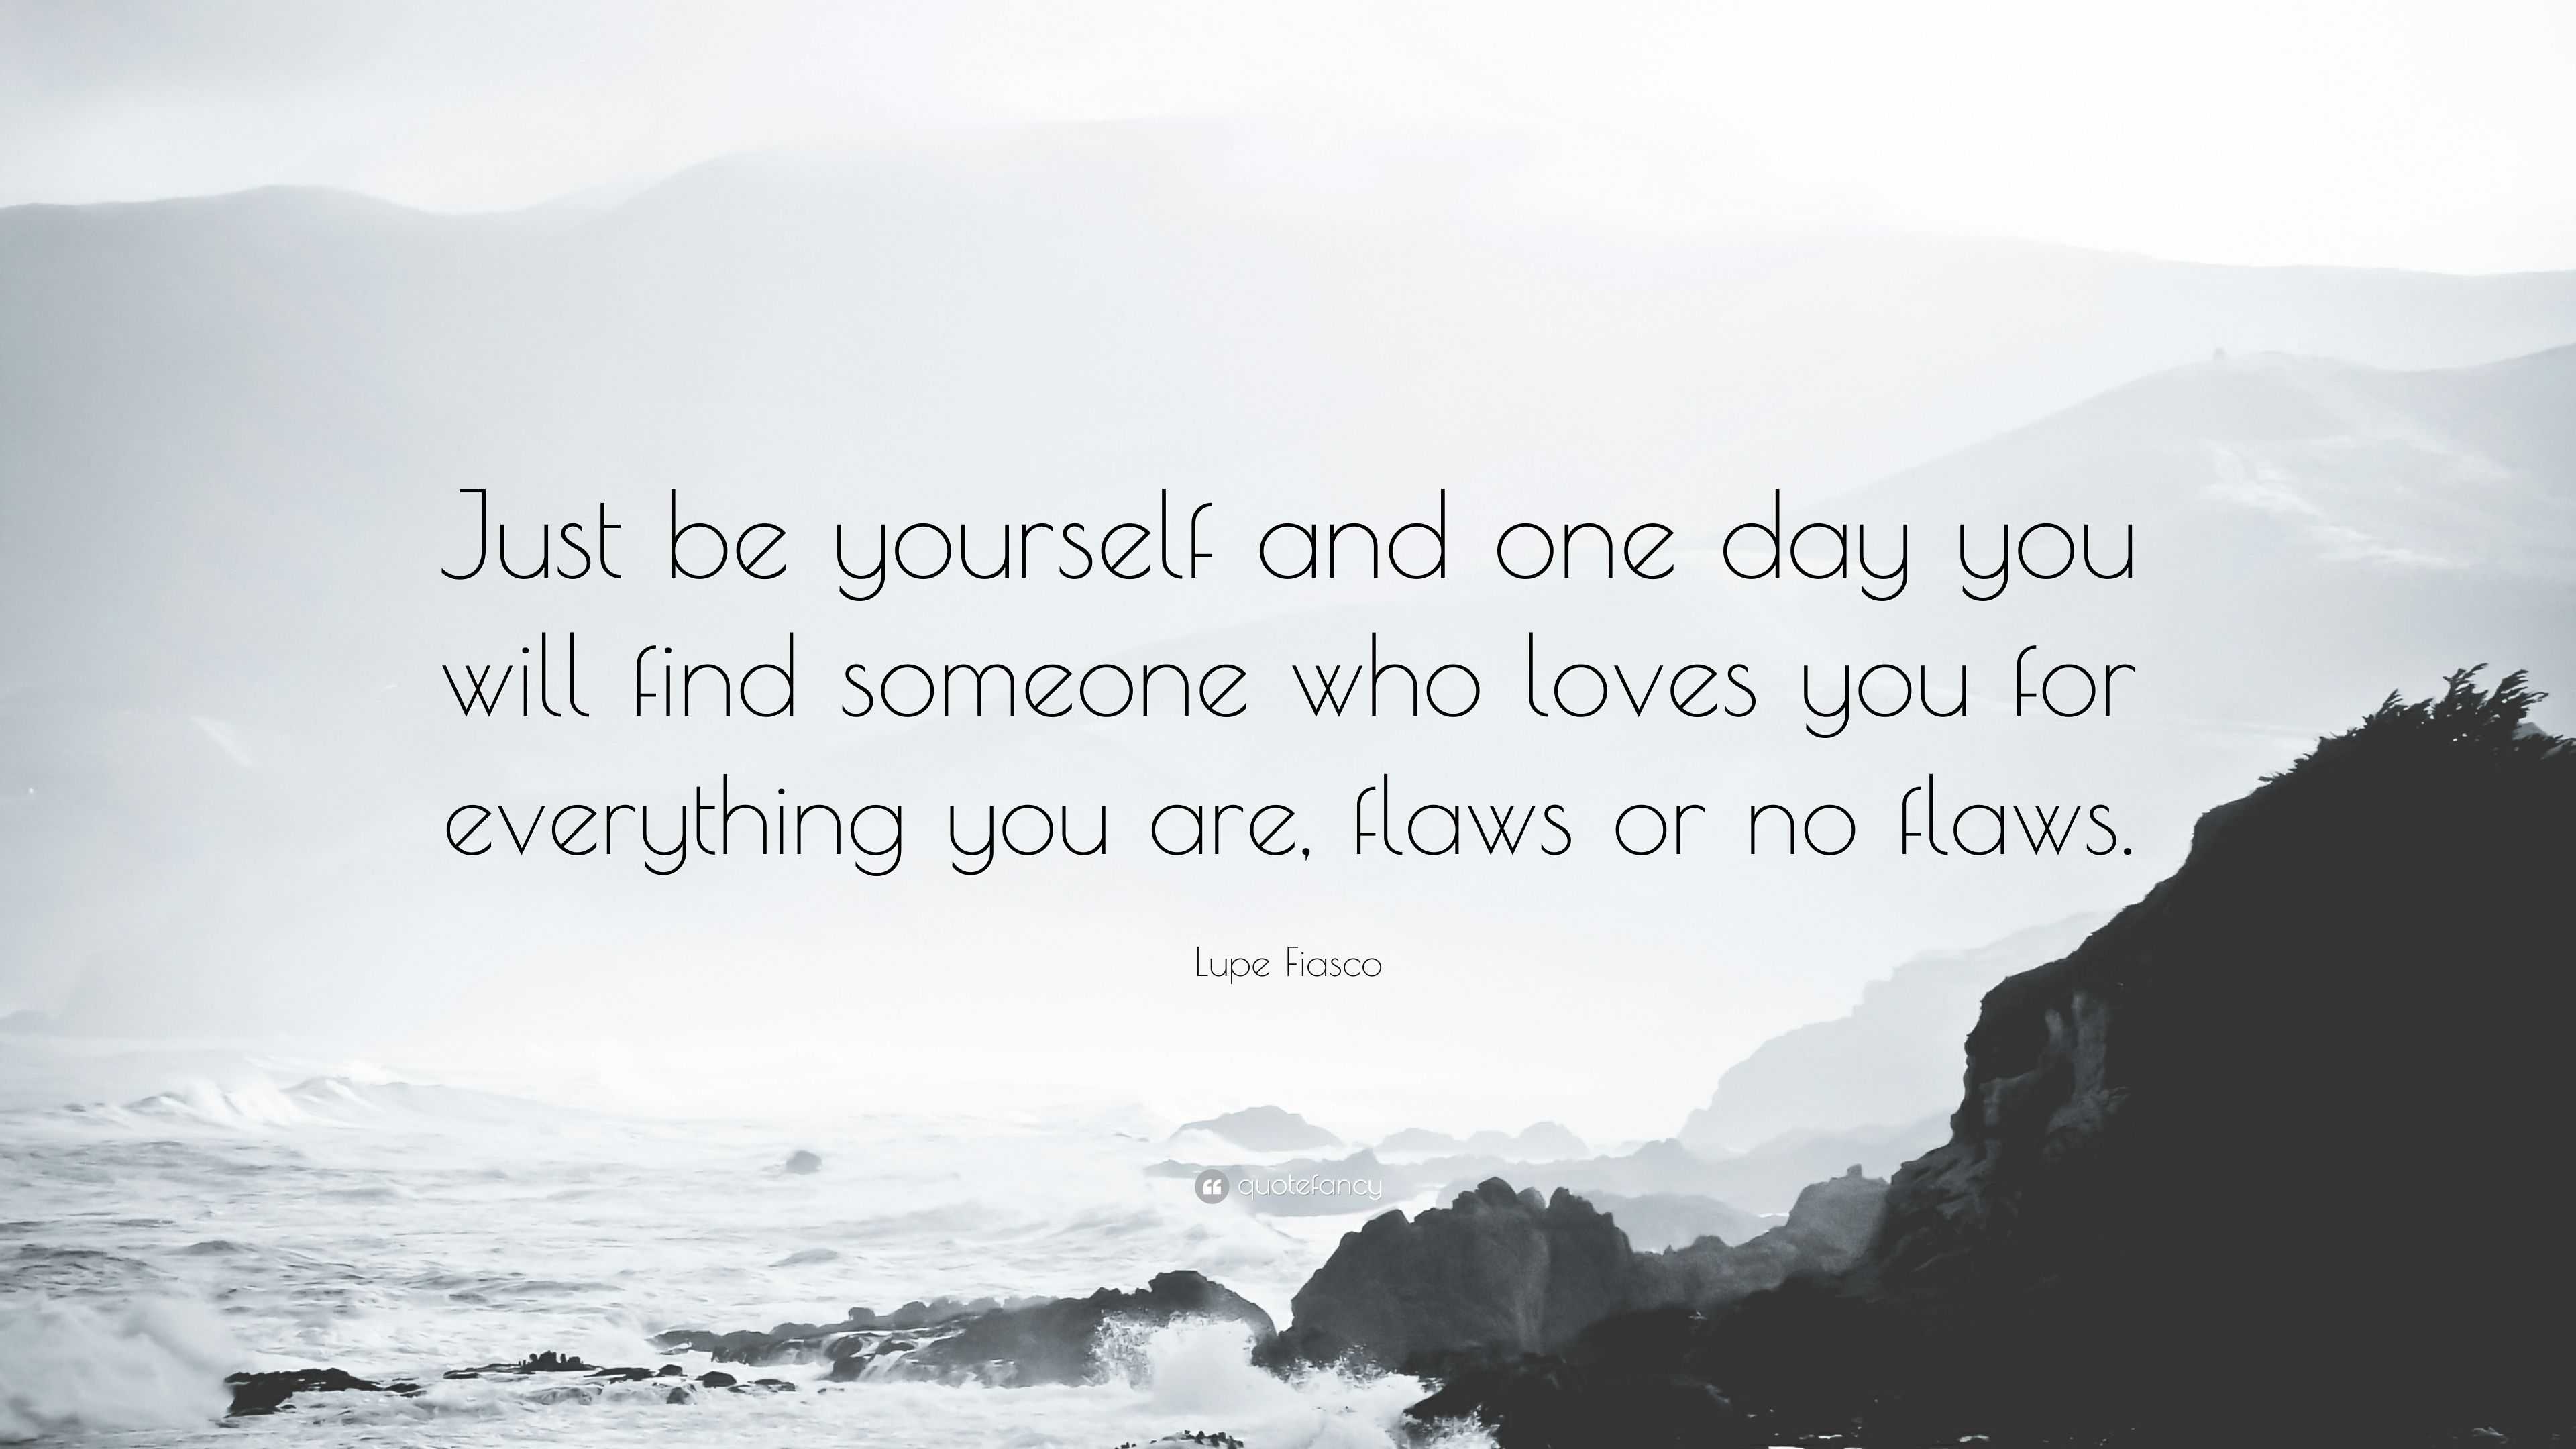 By being yourself, you'll find someone who loved you for YOU